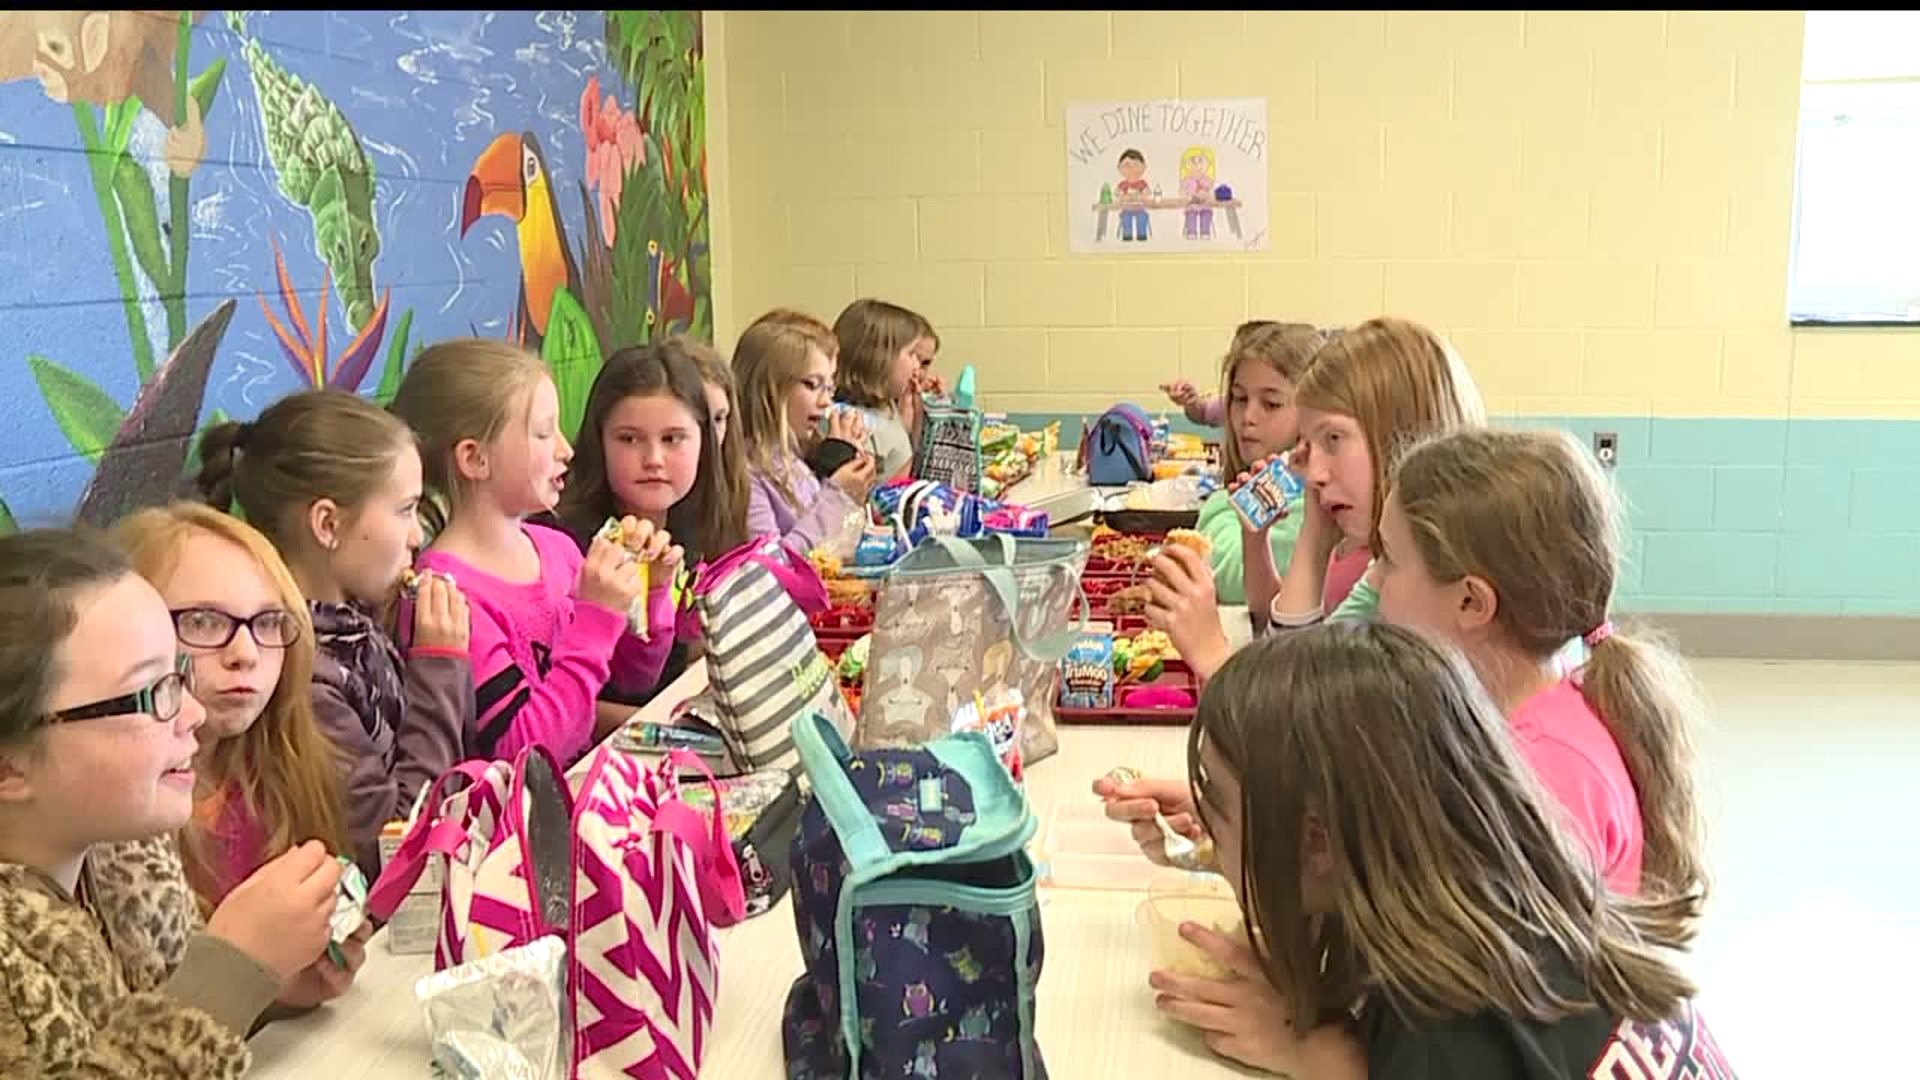 Elementary students stand up for classmates at lunch